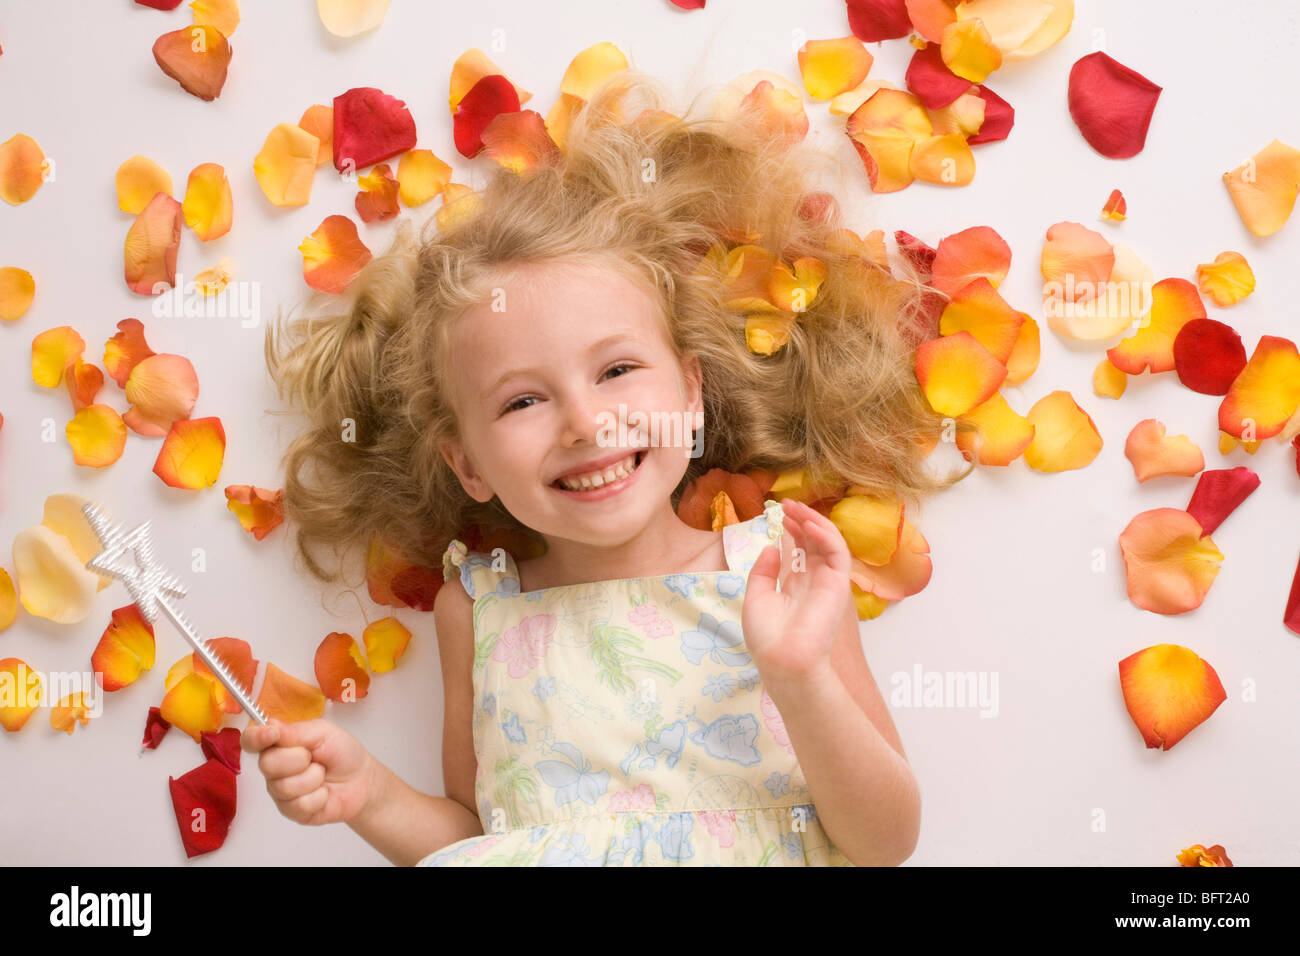 Blond Girl with Magic Wand Lying Amongst Flower Petals Stock Photo